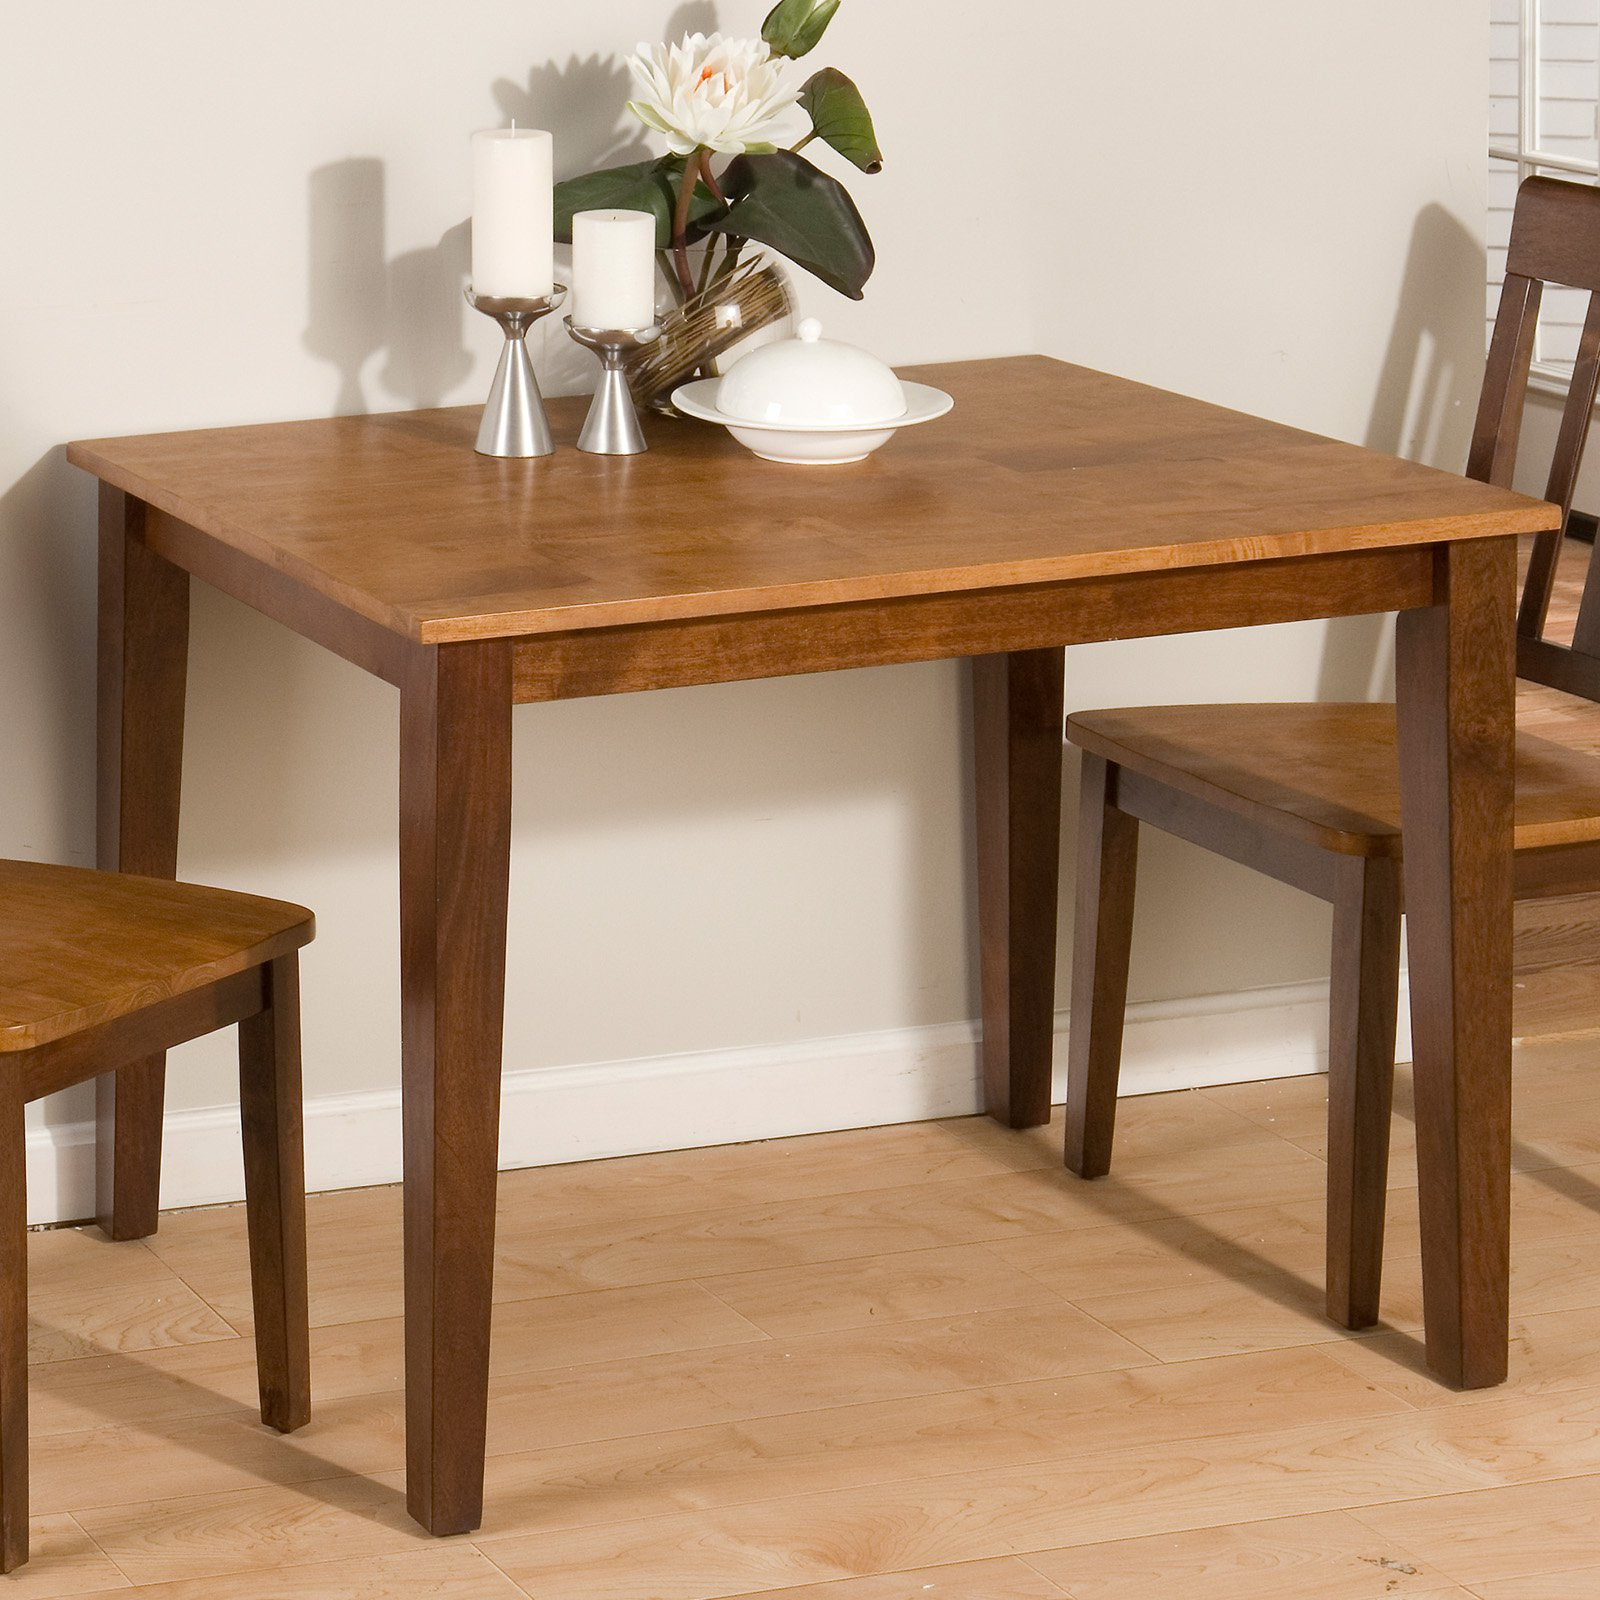 Small Kitchen Tables Sets
 Small Rectangular Kitchen Table – HomesFeed